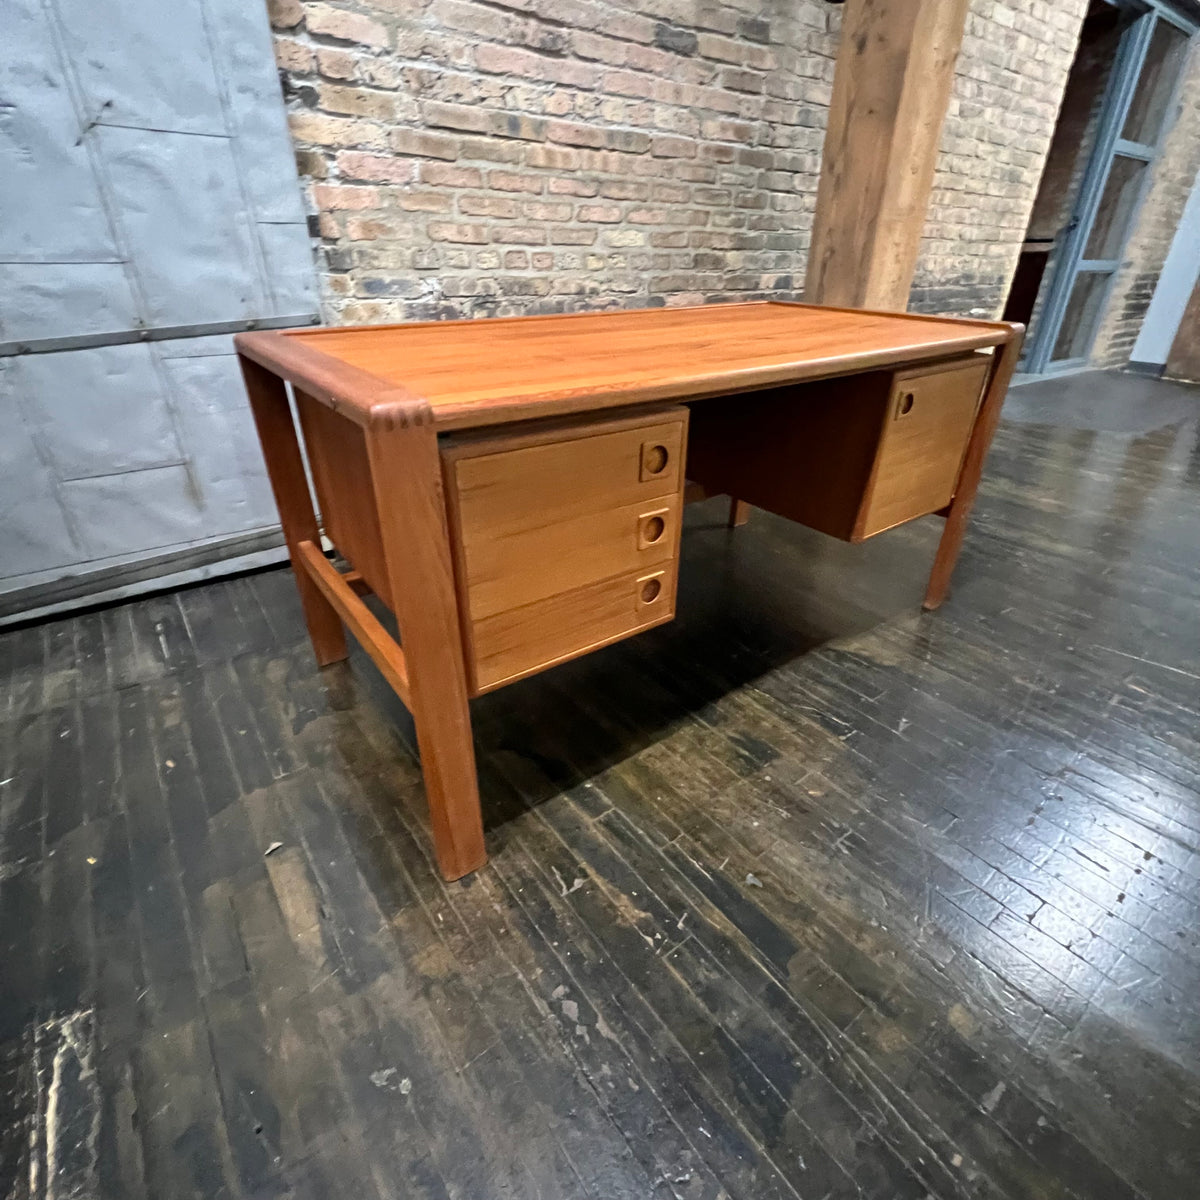 Mid-century executive floating top desk by H.P. Hansen manufactured in Demark circa 1970s. This beautiful desk was made of the highest quality teak.  The back of the desk is completely finished and has one inset opening that can be used for book storage or to display decorative items. STUDIO SONJA MILAN, Chicago, IL